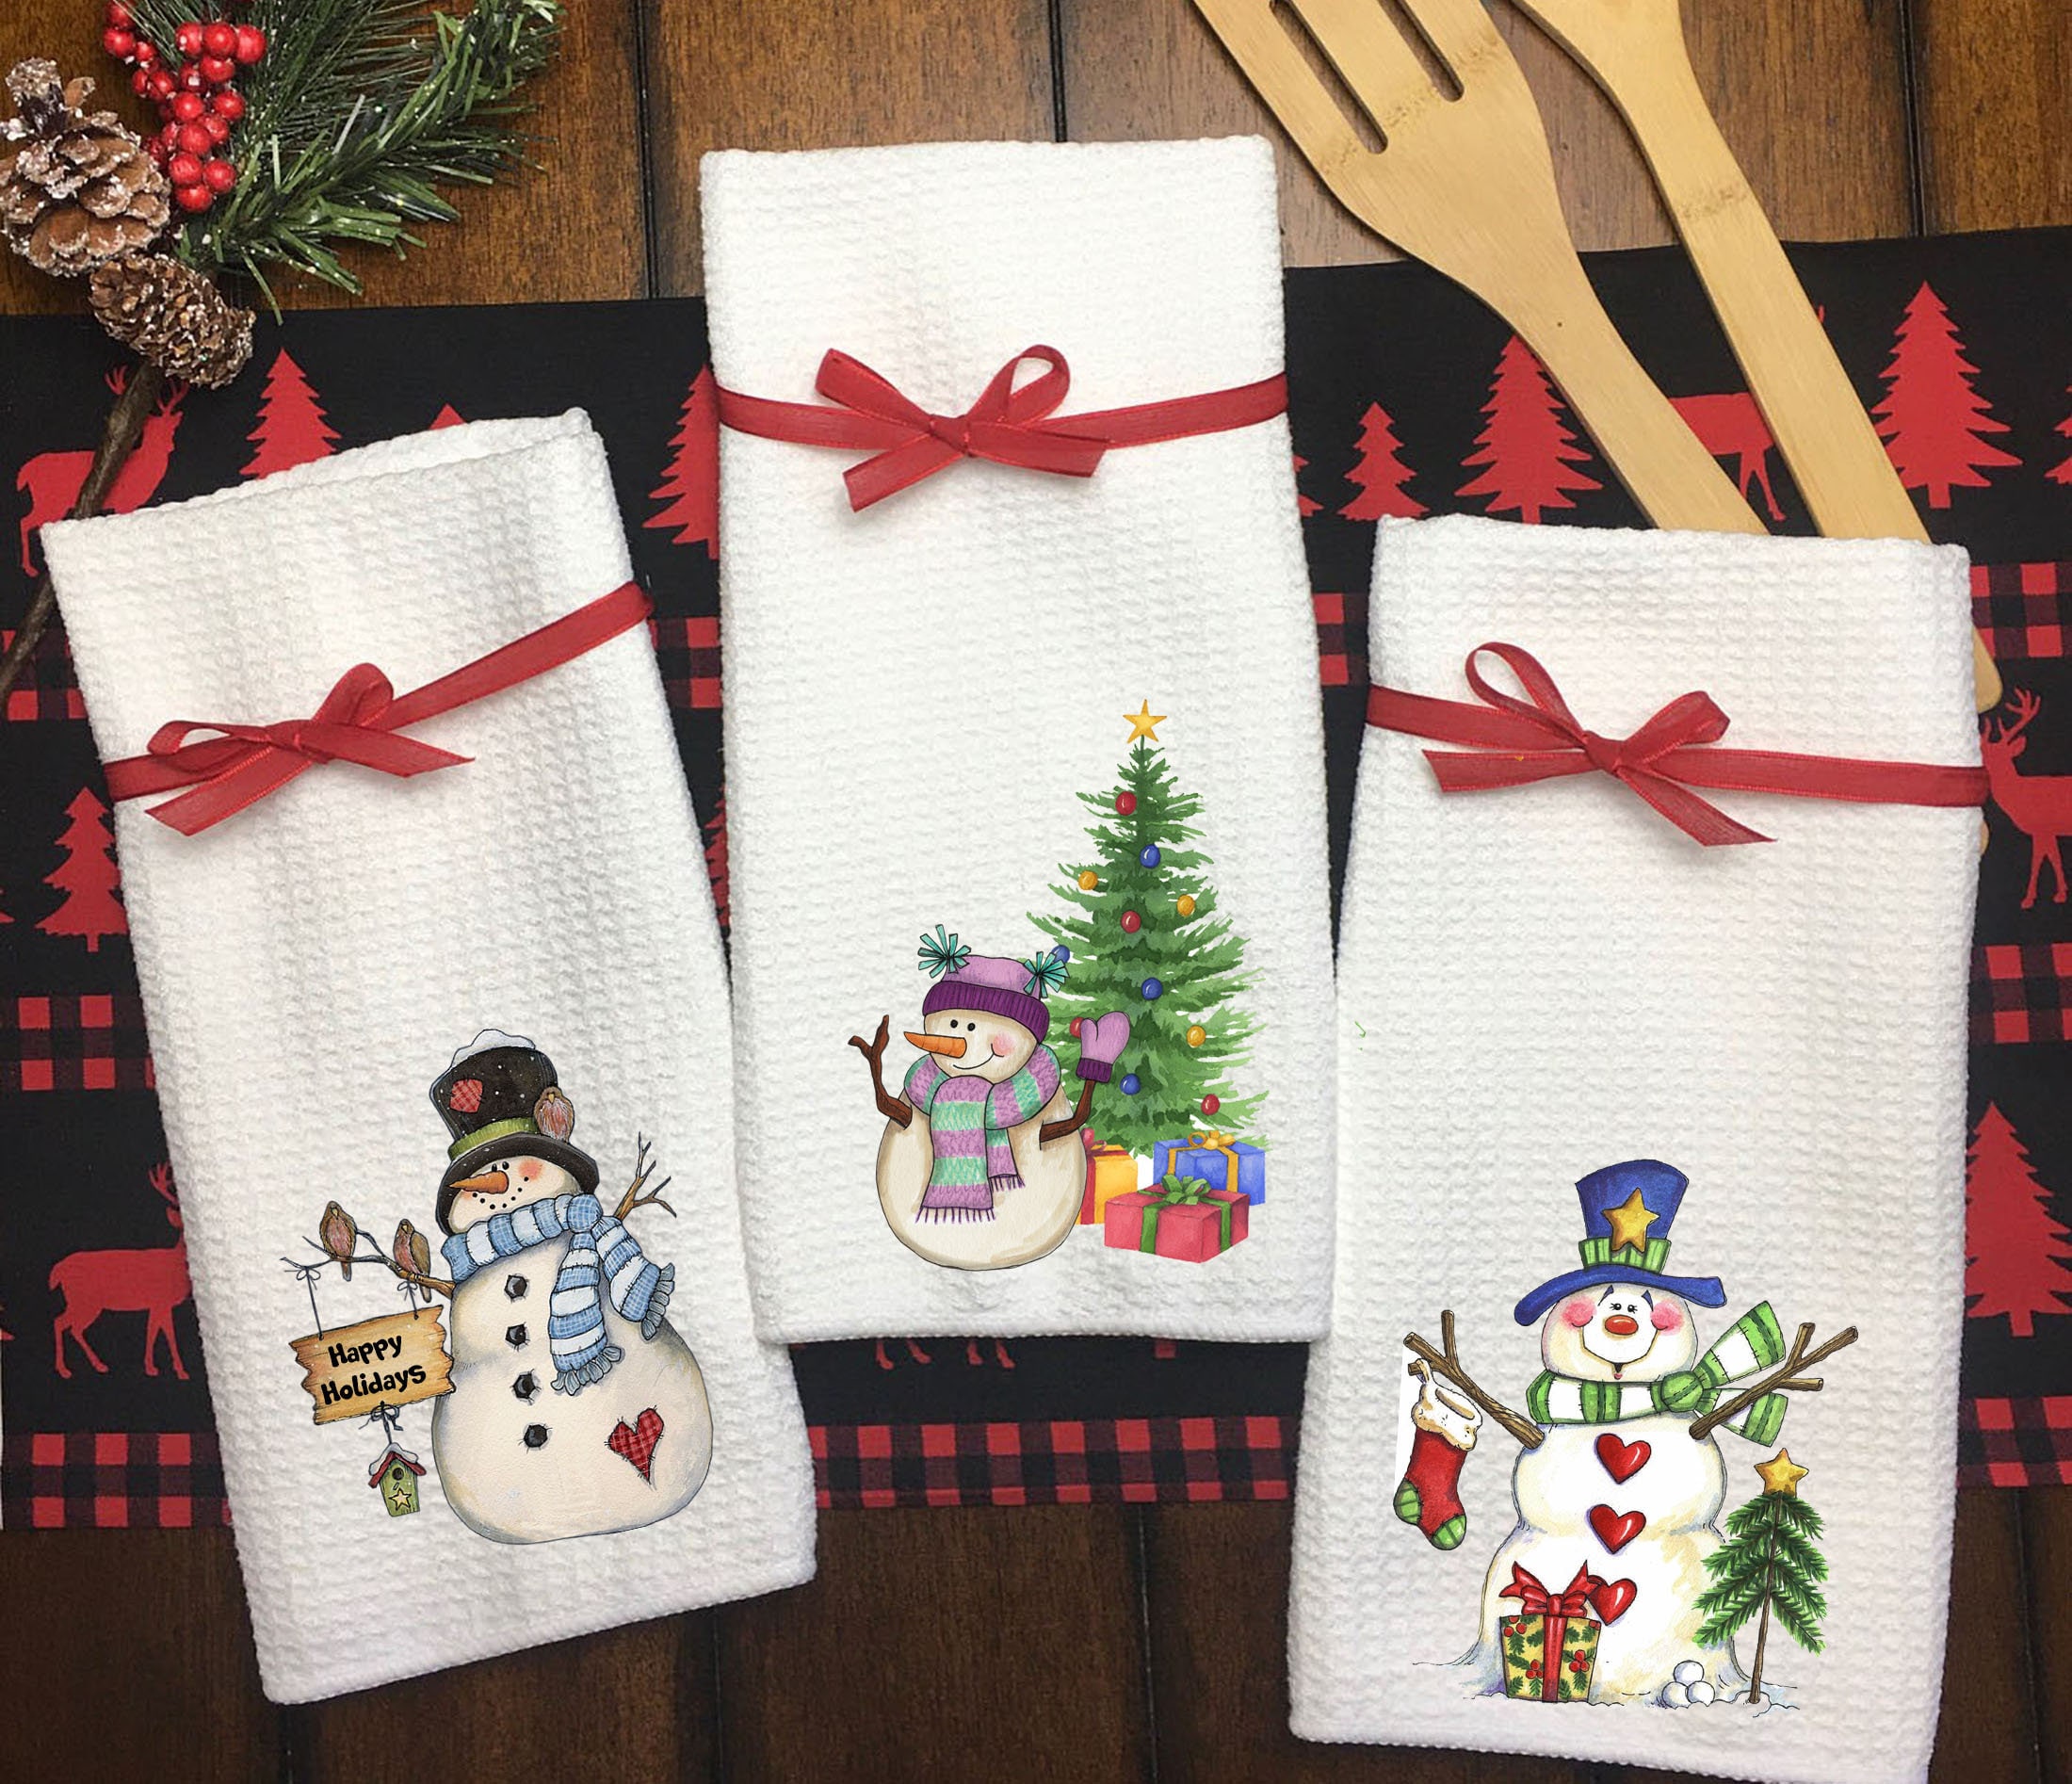 2pcs Red Snowman Let It Snow Xmas Trees Hello Winter Kitchen Towels Dish  Towels, 18x26 Inch Daily Seasonal Christmas Decoration Hand Towels